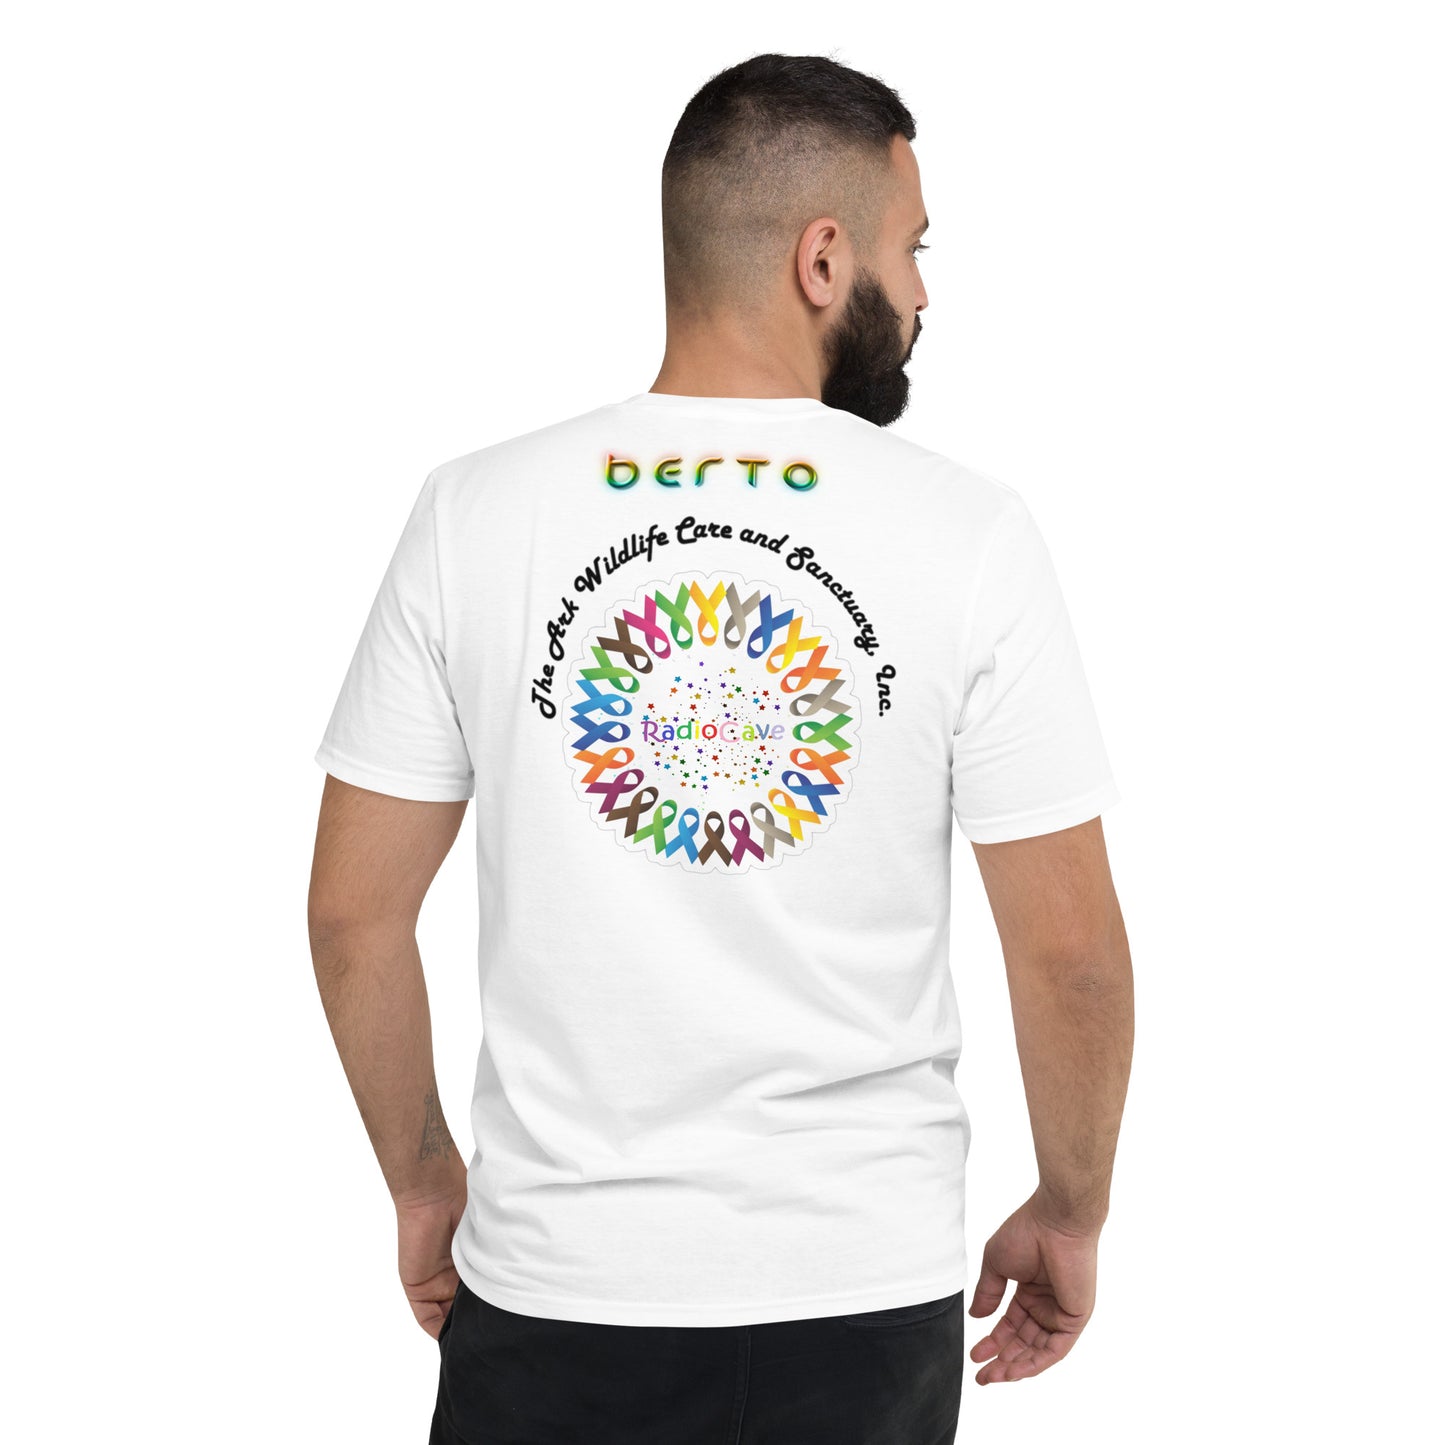 Earthdance 2023 - Berto v1 - Limited Edition - Short-Sleeve T-Shirt - The Foundation of Families